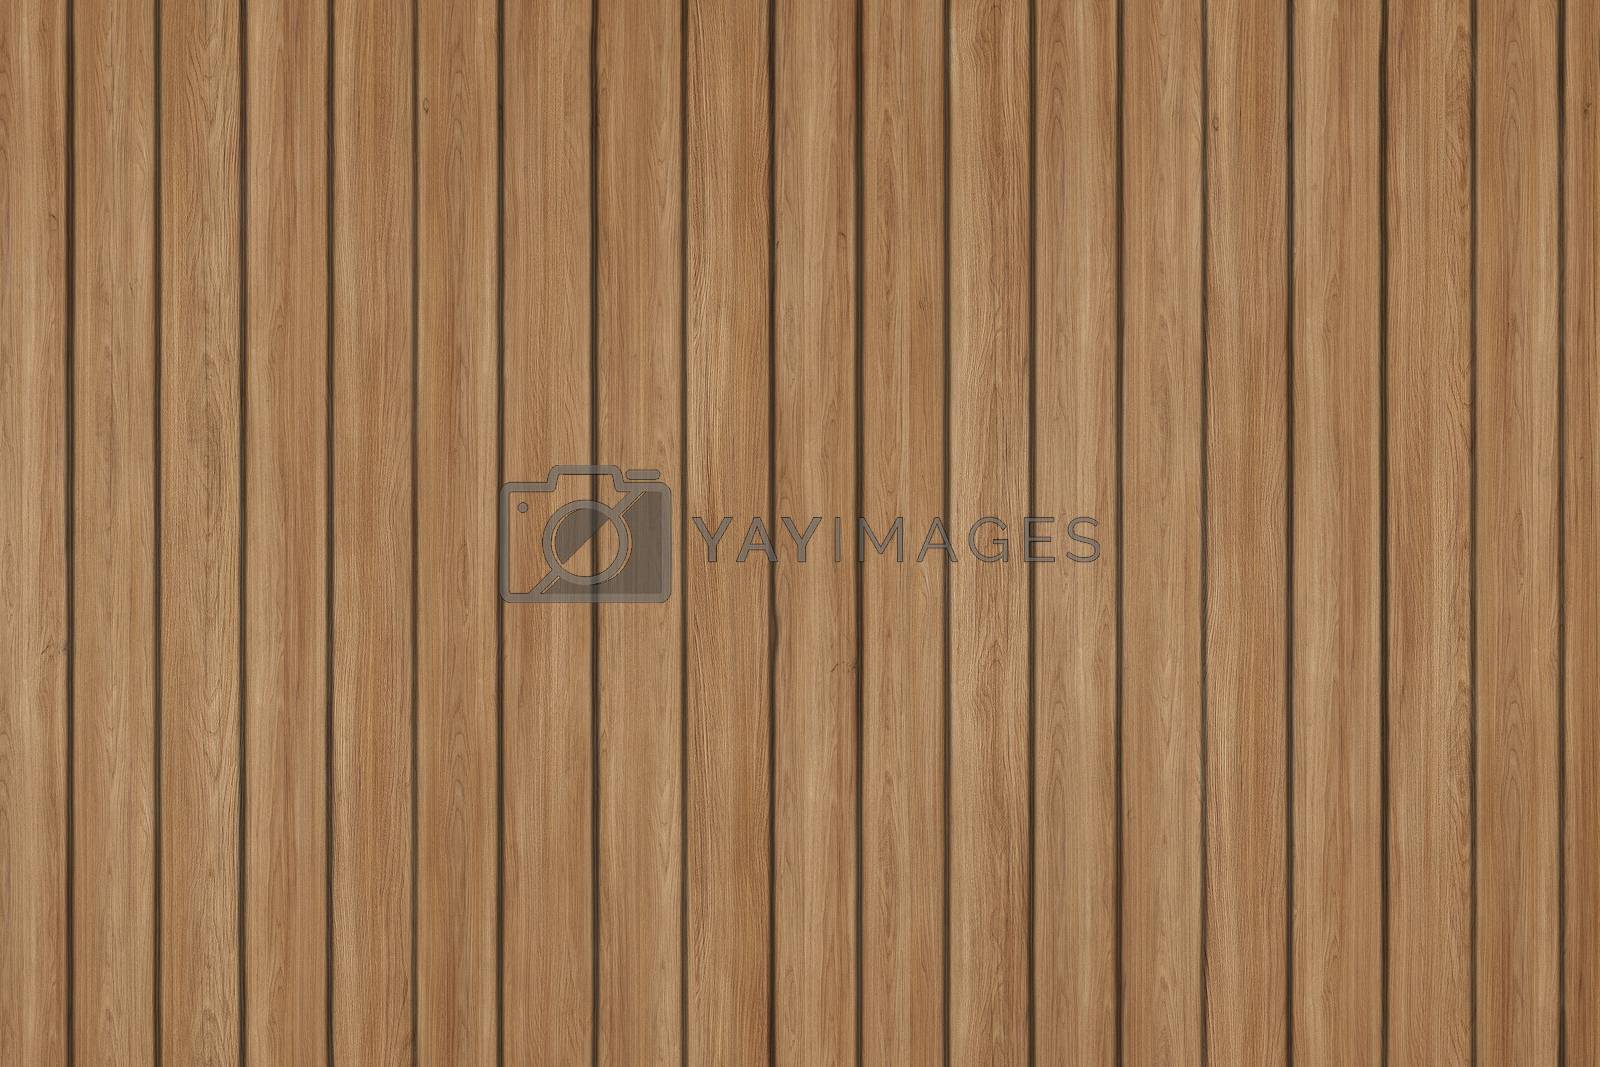 Royalty free image of grunge wood pattern texture background, wooden planks by ivo_13